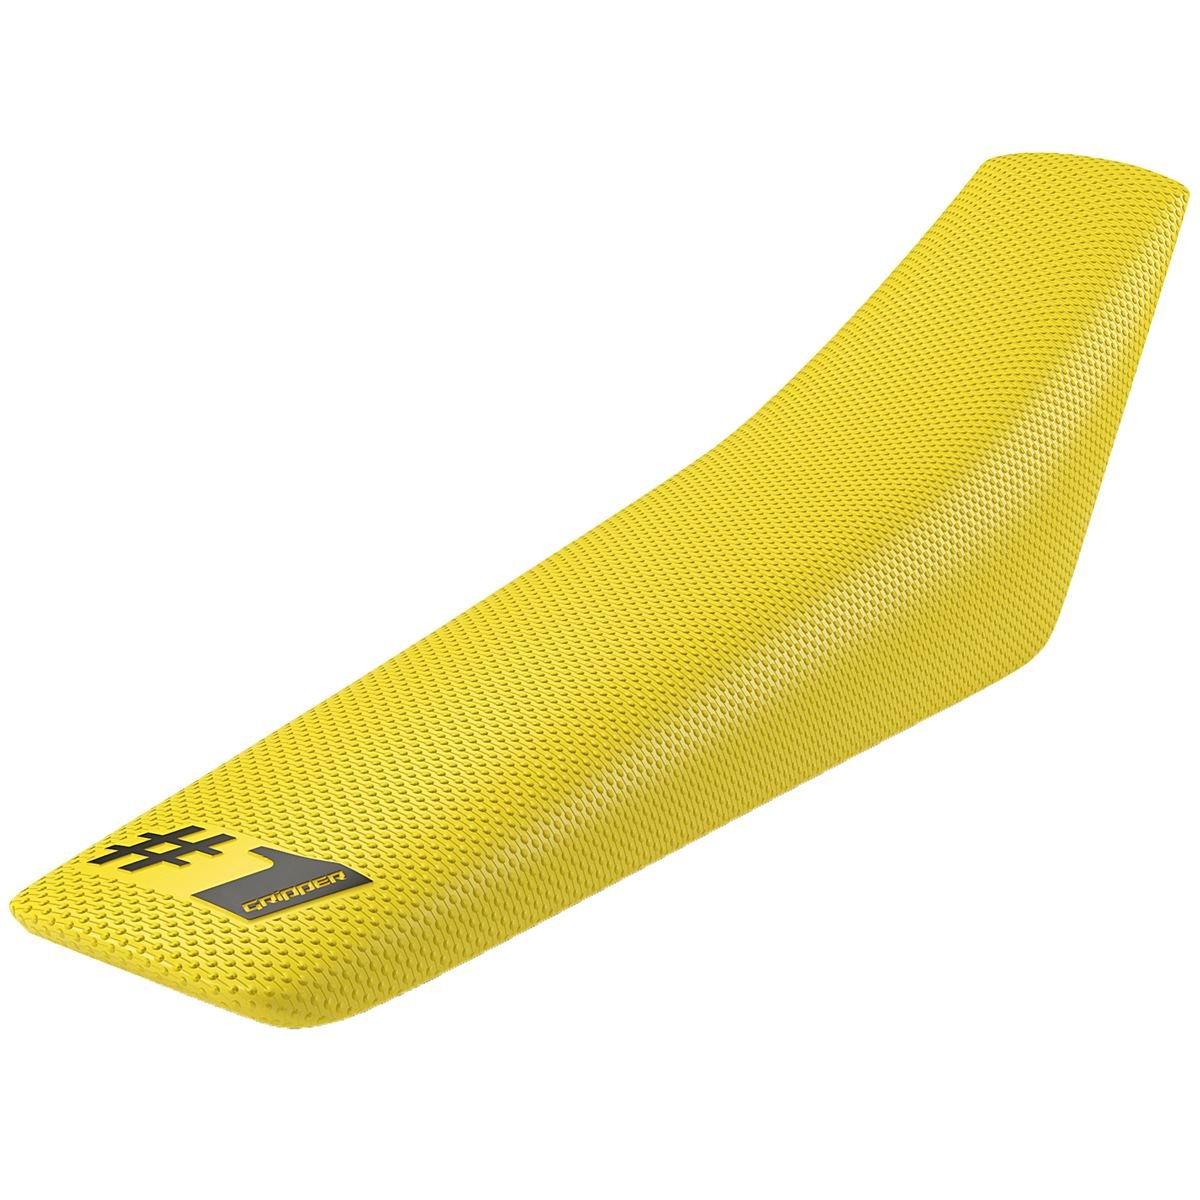 Onegripper Seat Cover Original - V2 Yellow